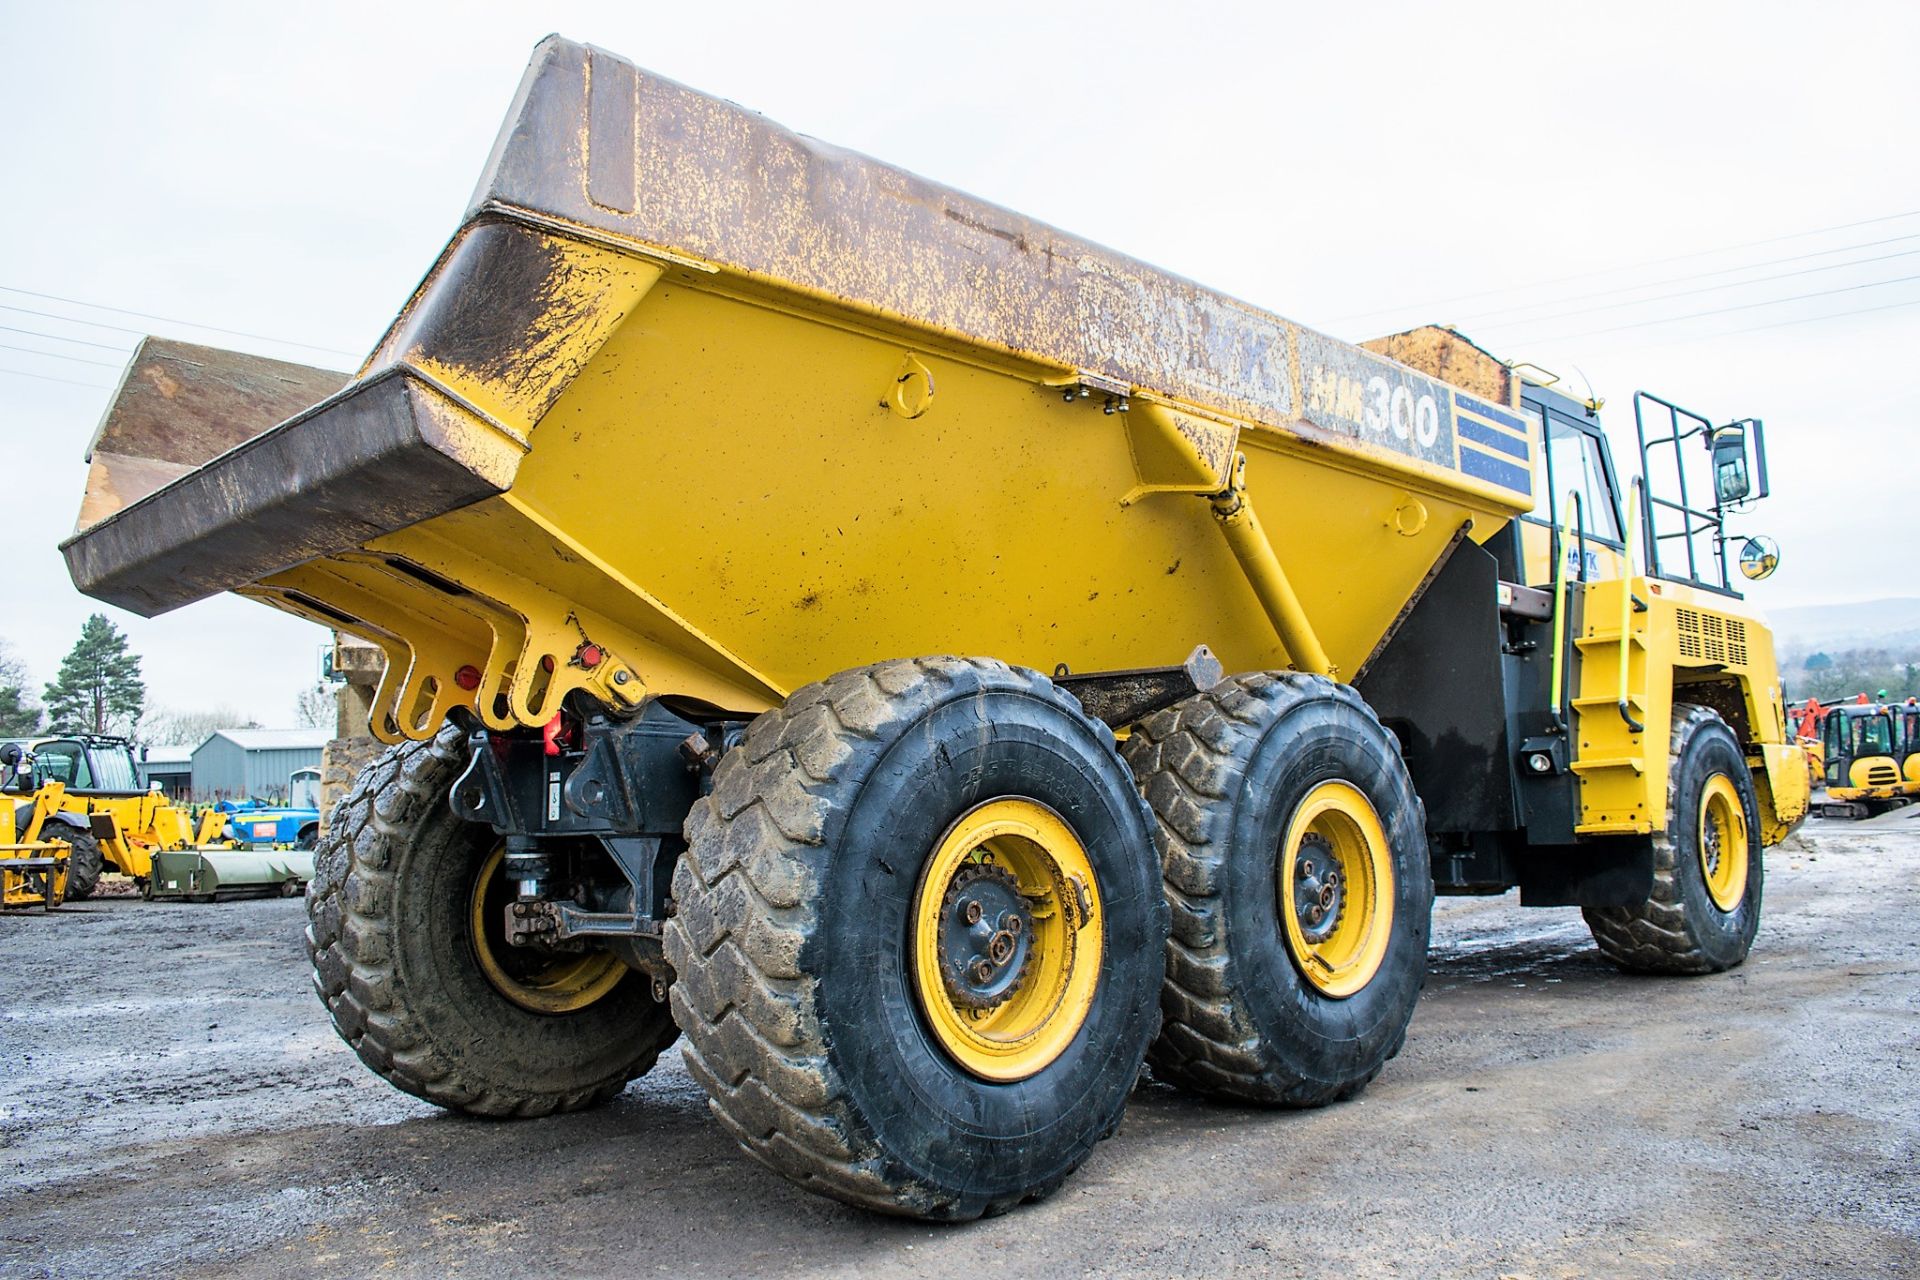 Komatsu HM300-3 articulated dump truck  Year: 2015 S/N: 3636 Recorded Hours: 4881 KOM657 - Image 4 of 15